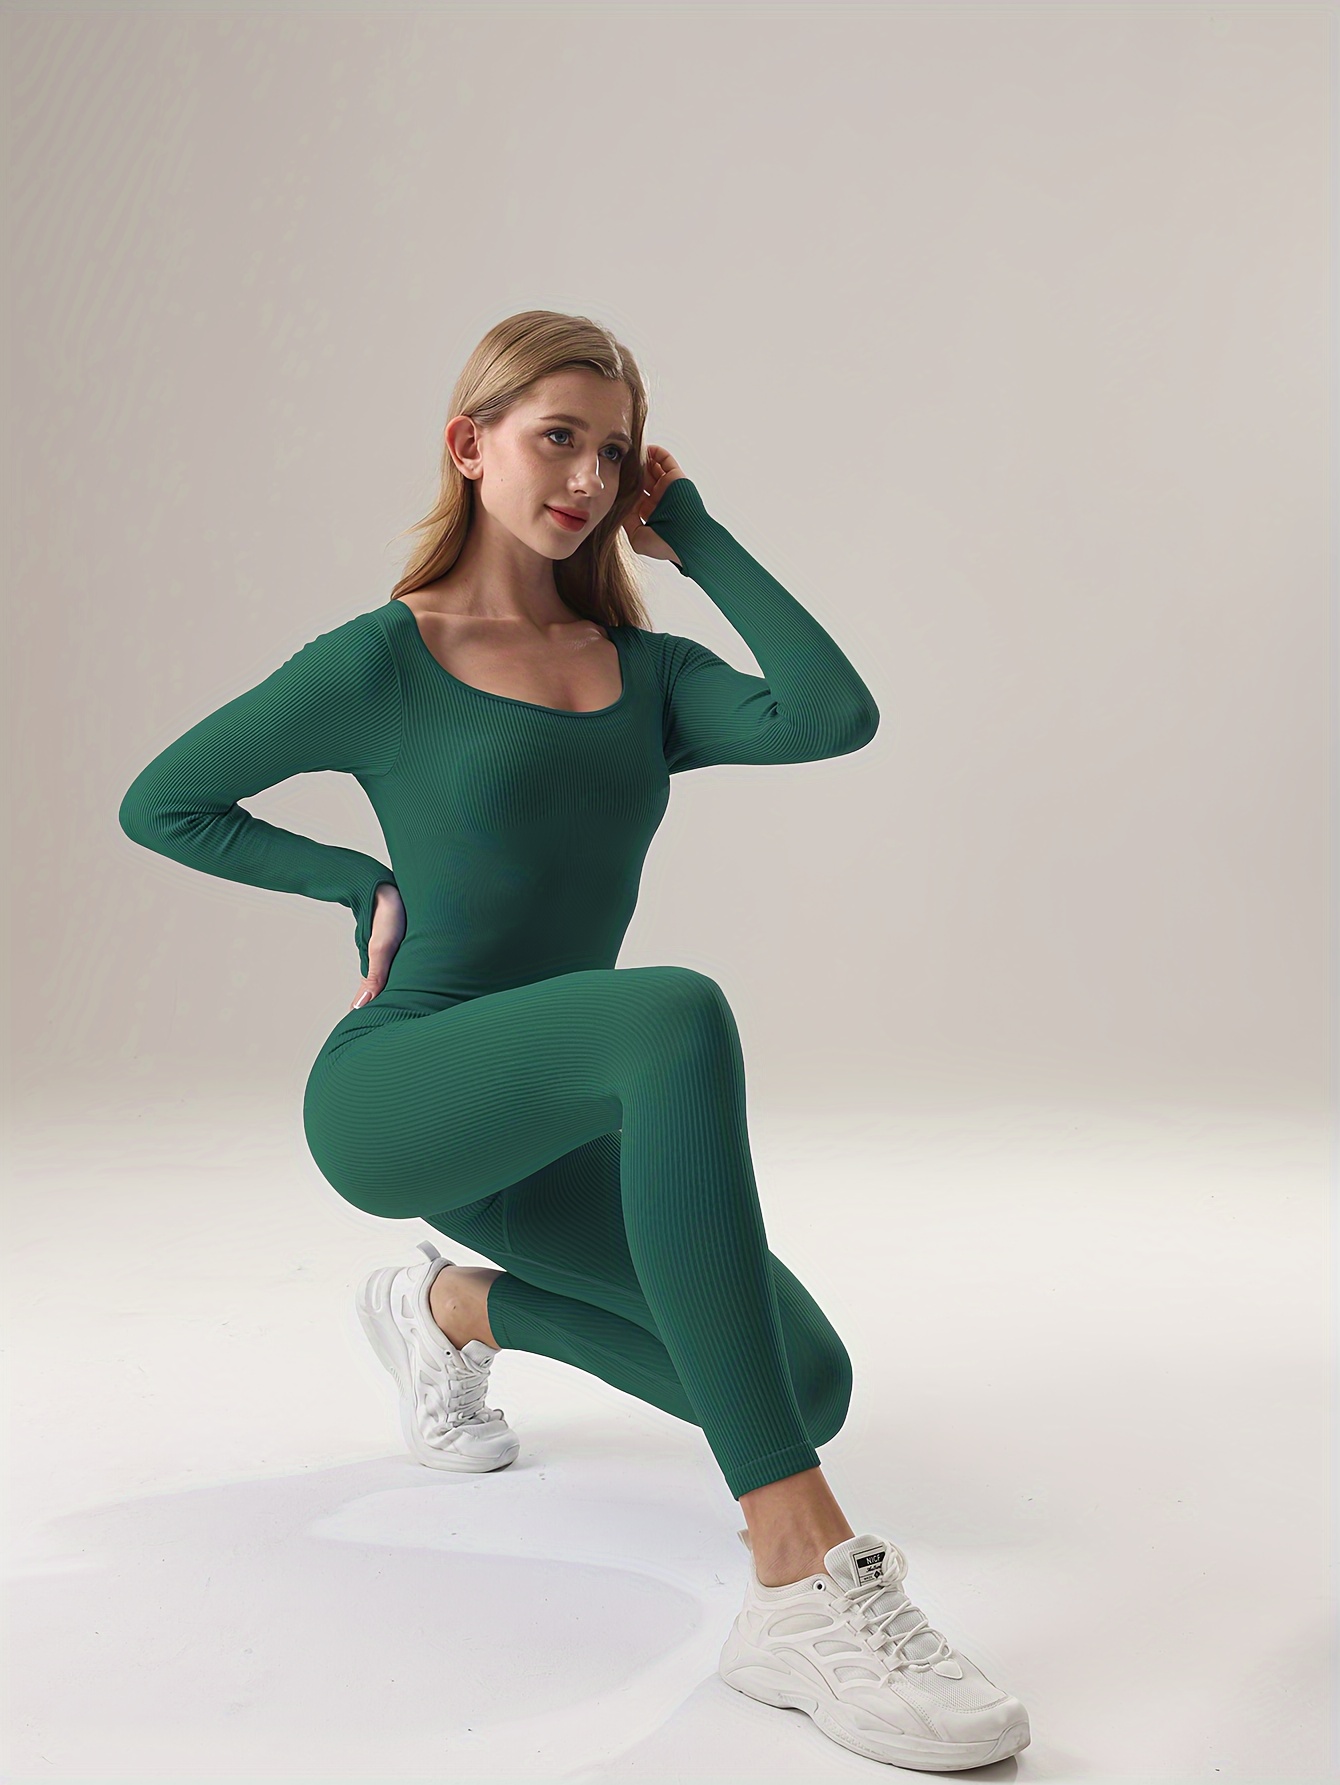 JIUKE Long Sleeve Jumpsuit for Women Solid Color Tight Yoga Sports